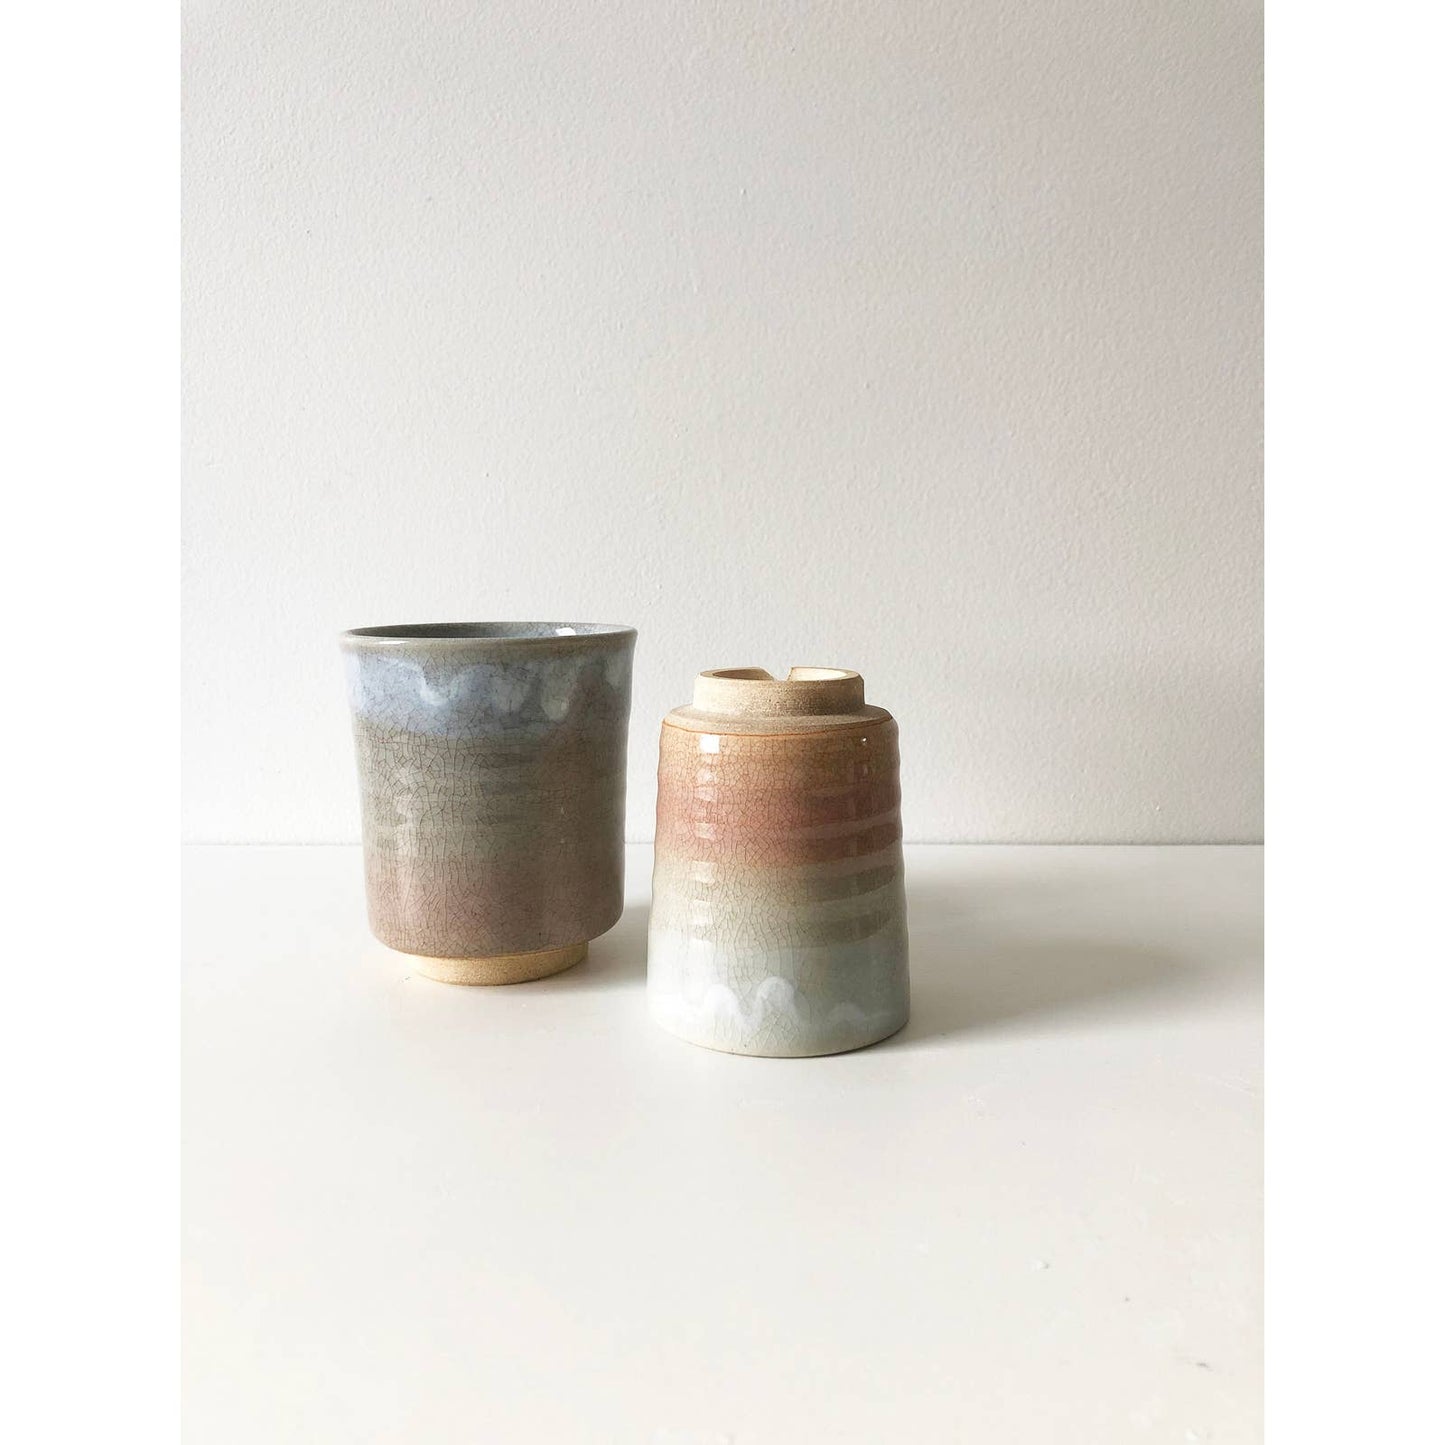 Vintage Handcrafted Ceramic Pastel Small Vases